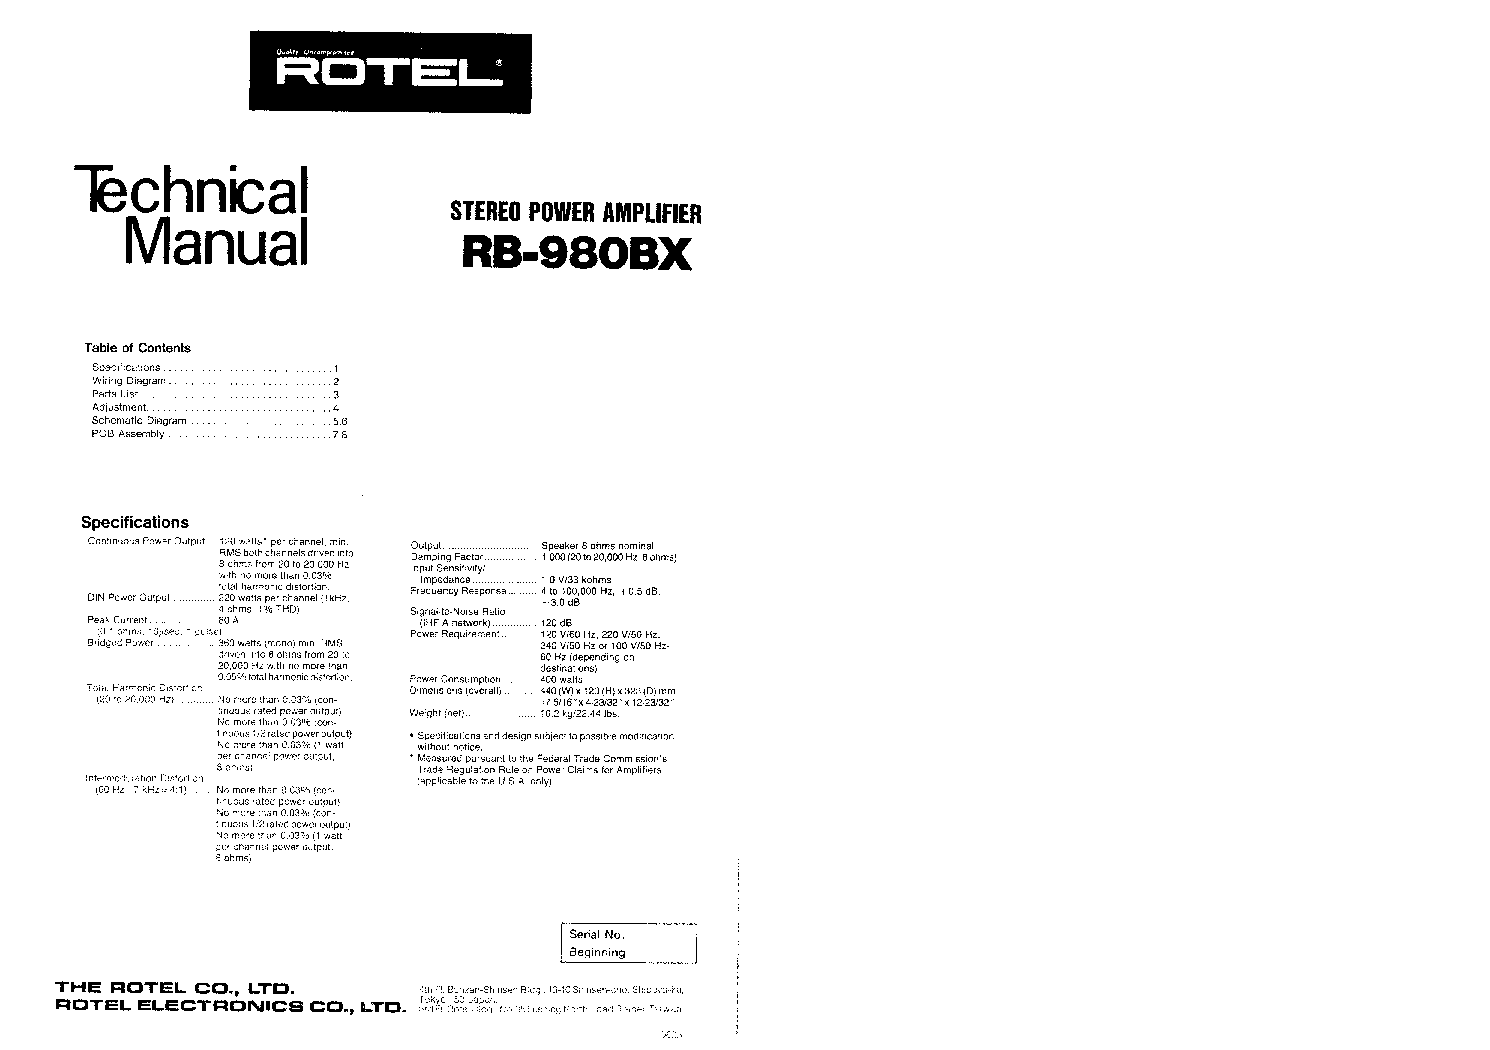 ROTEL RB-980BX SM service manual (1st page)